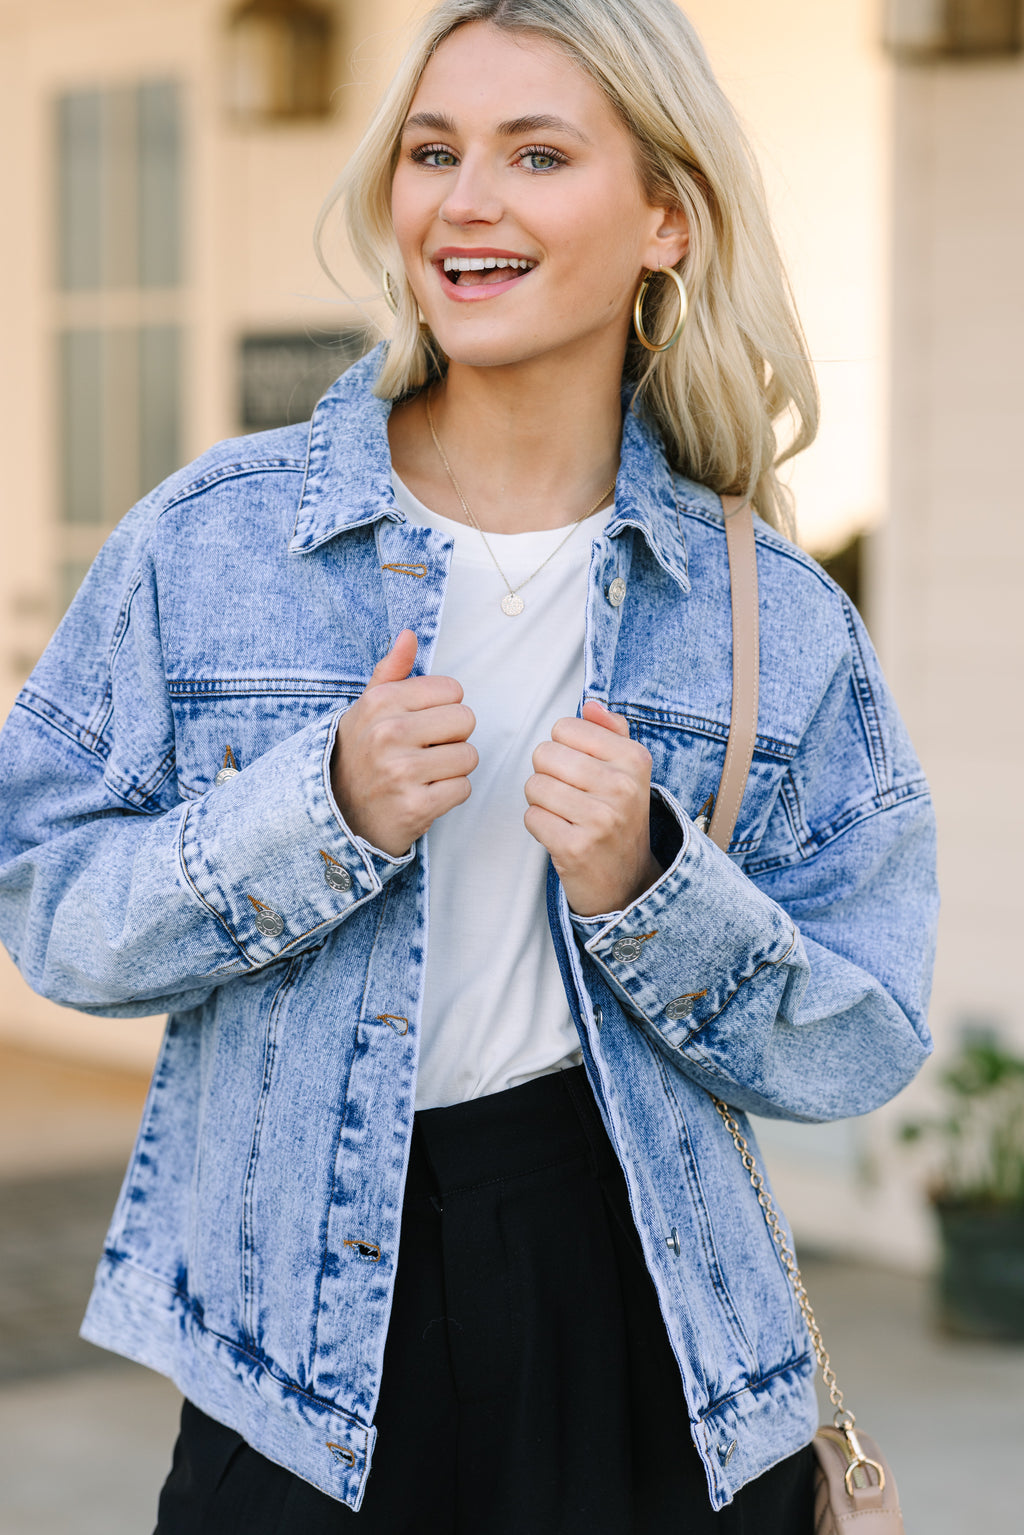 How to Care for Your Denim Jacket - Woodies Clothing